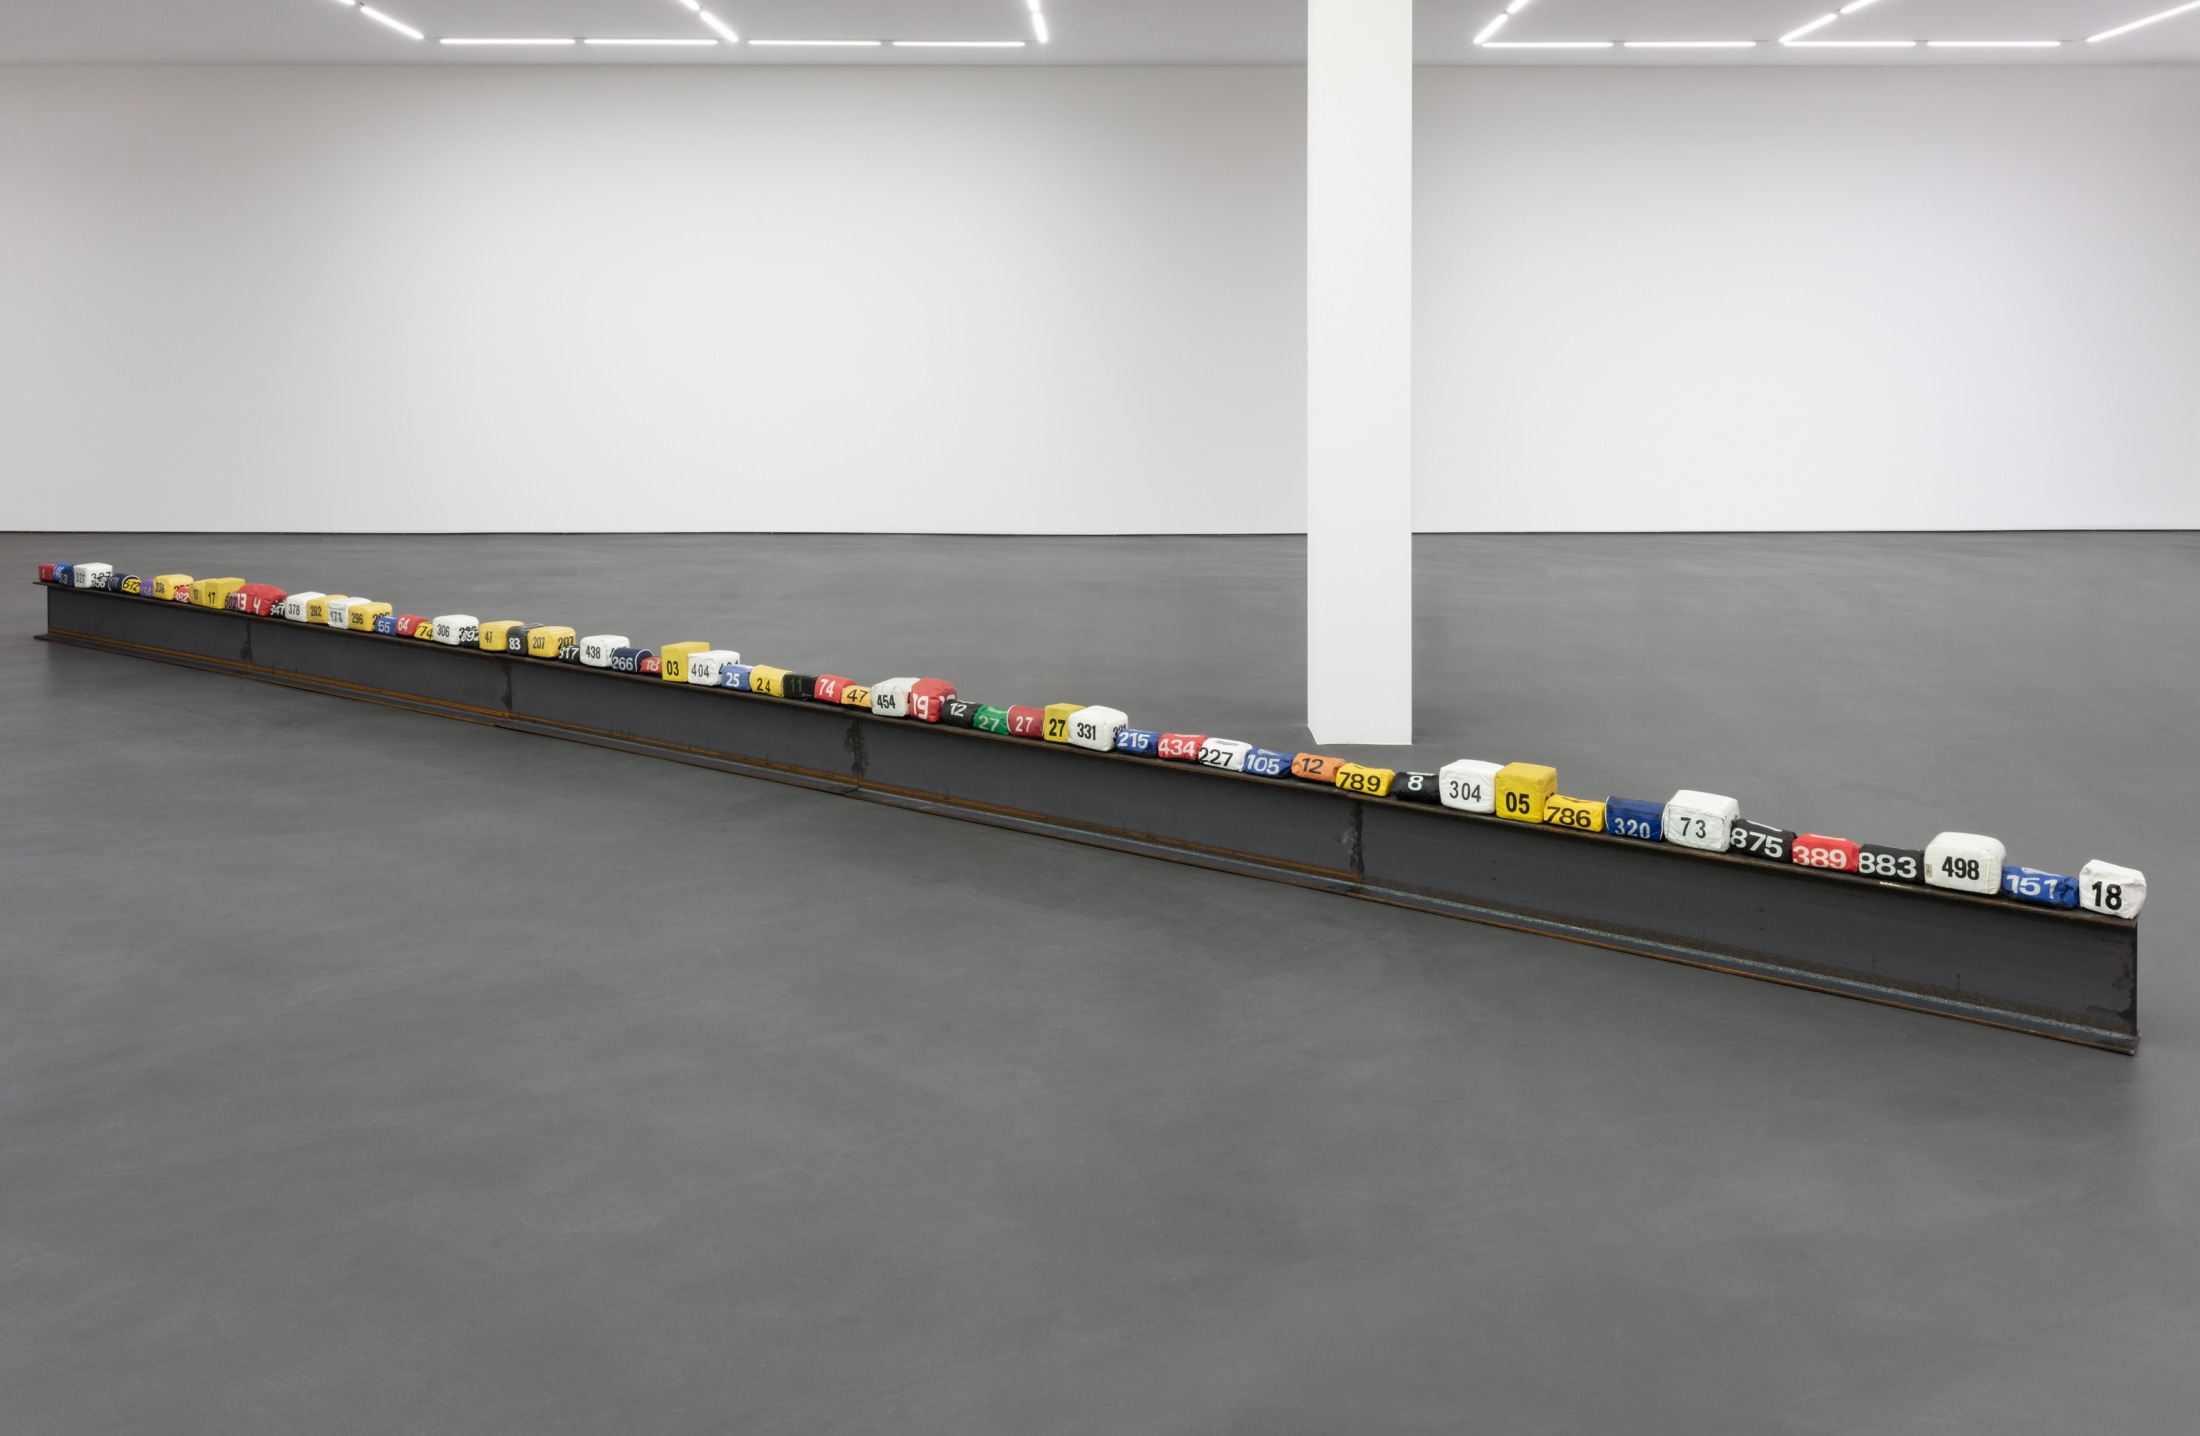 Prisms, 2022, 64 pouches (vinyl, magnets, styrofoam), 5 I-beams (IPE 300), dimensions variable (10 m long approx.), beams: 30 x 15 x 200 cm (11 3/4 x 5 7/8 x 78 3/4 in) each (5 parts) (JL 072)